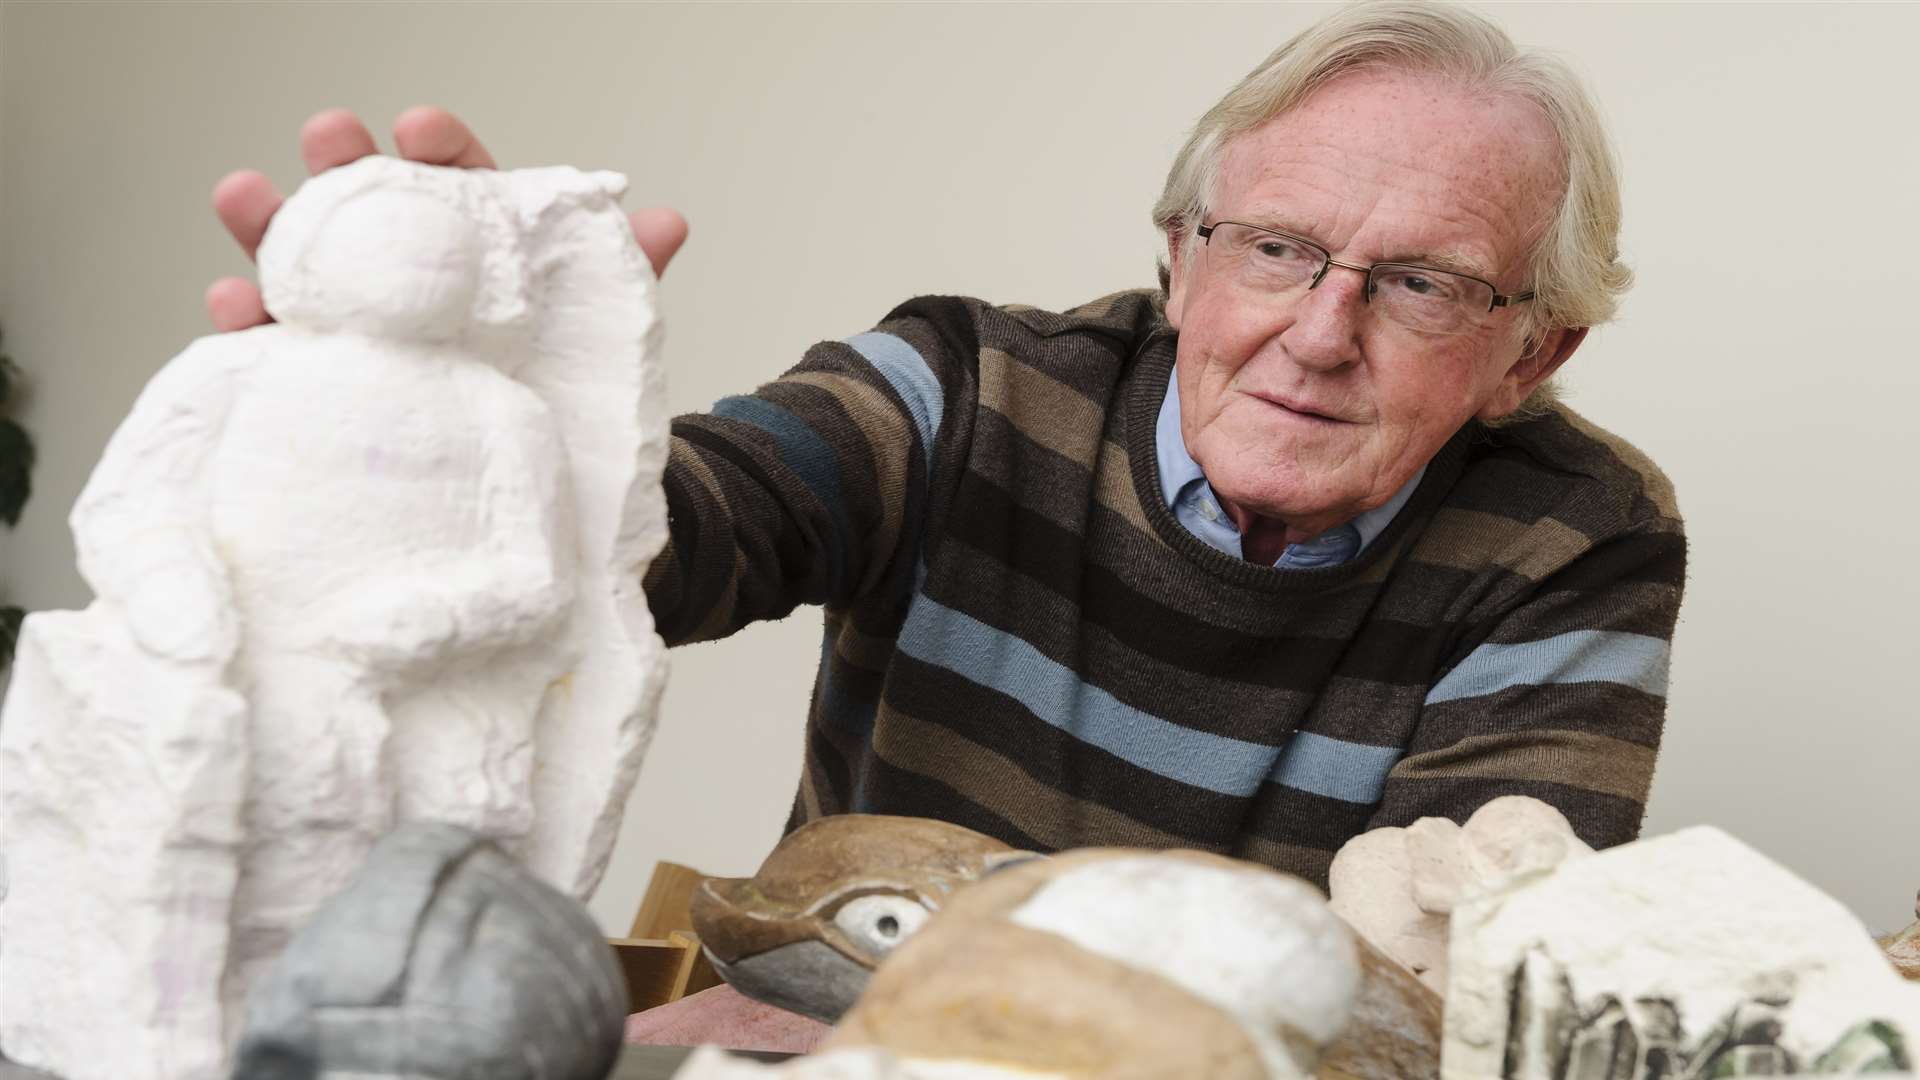 Charlie Samuel is offering some of his chalk sculptures to the National Trust